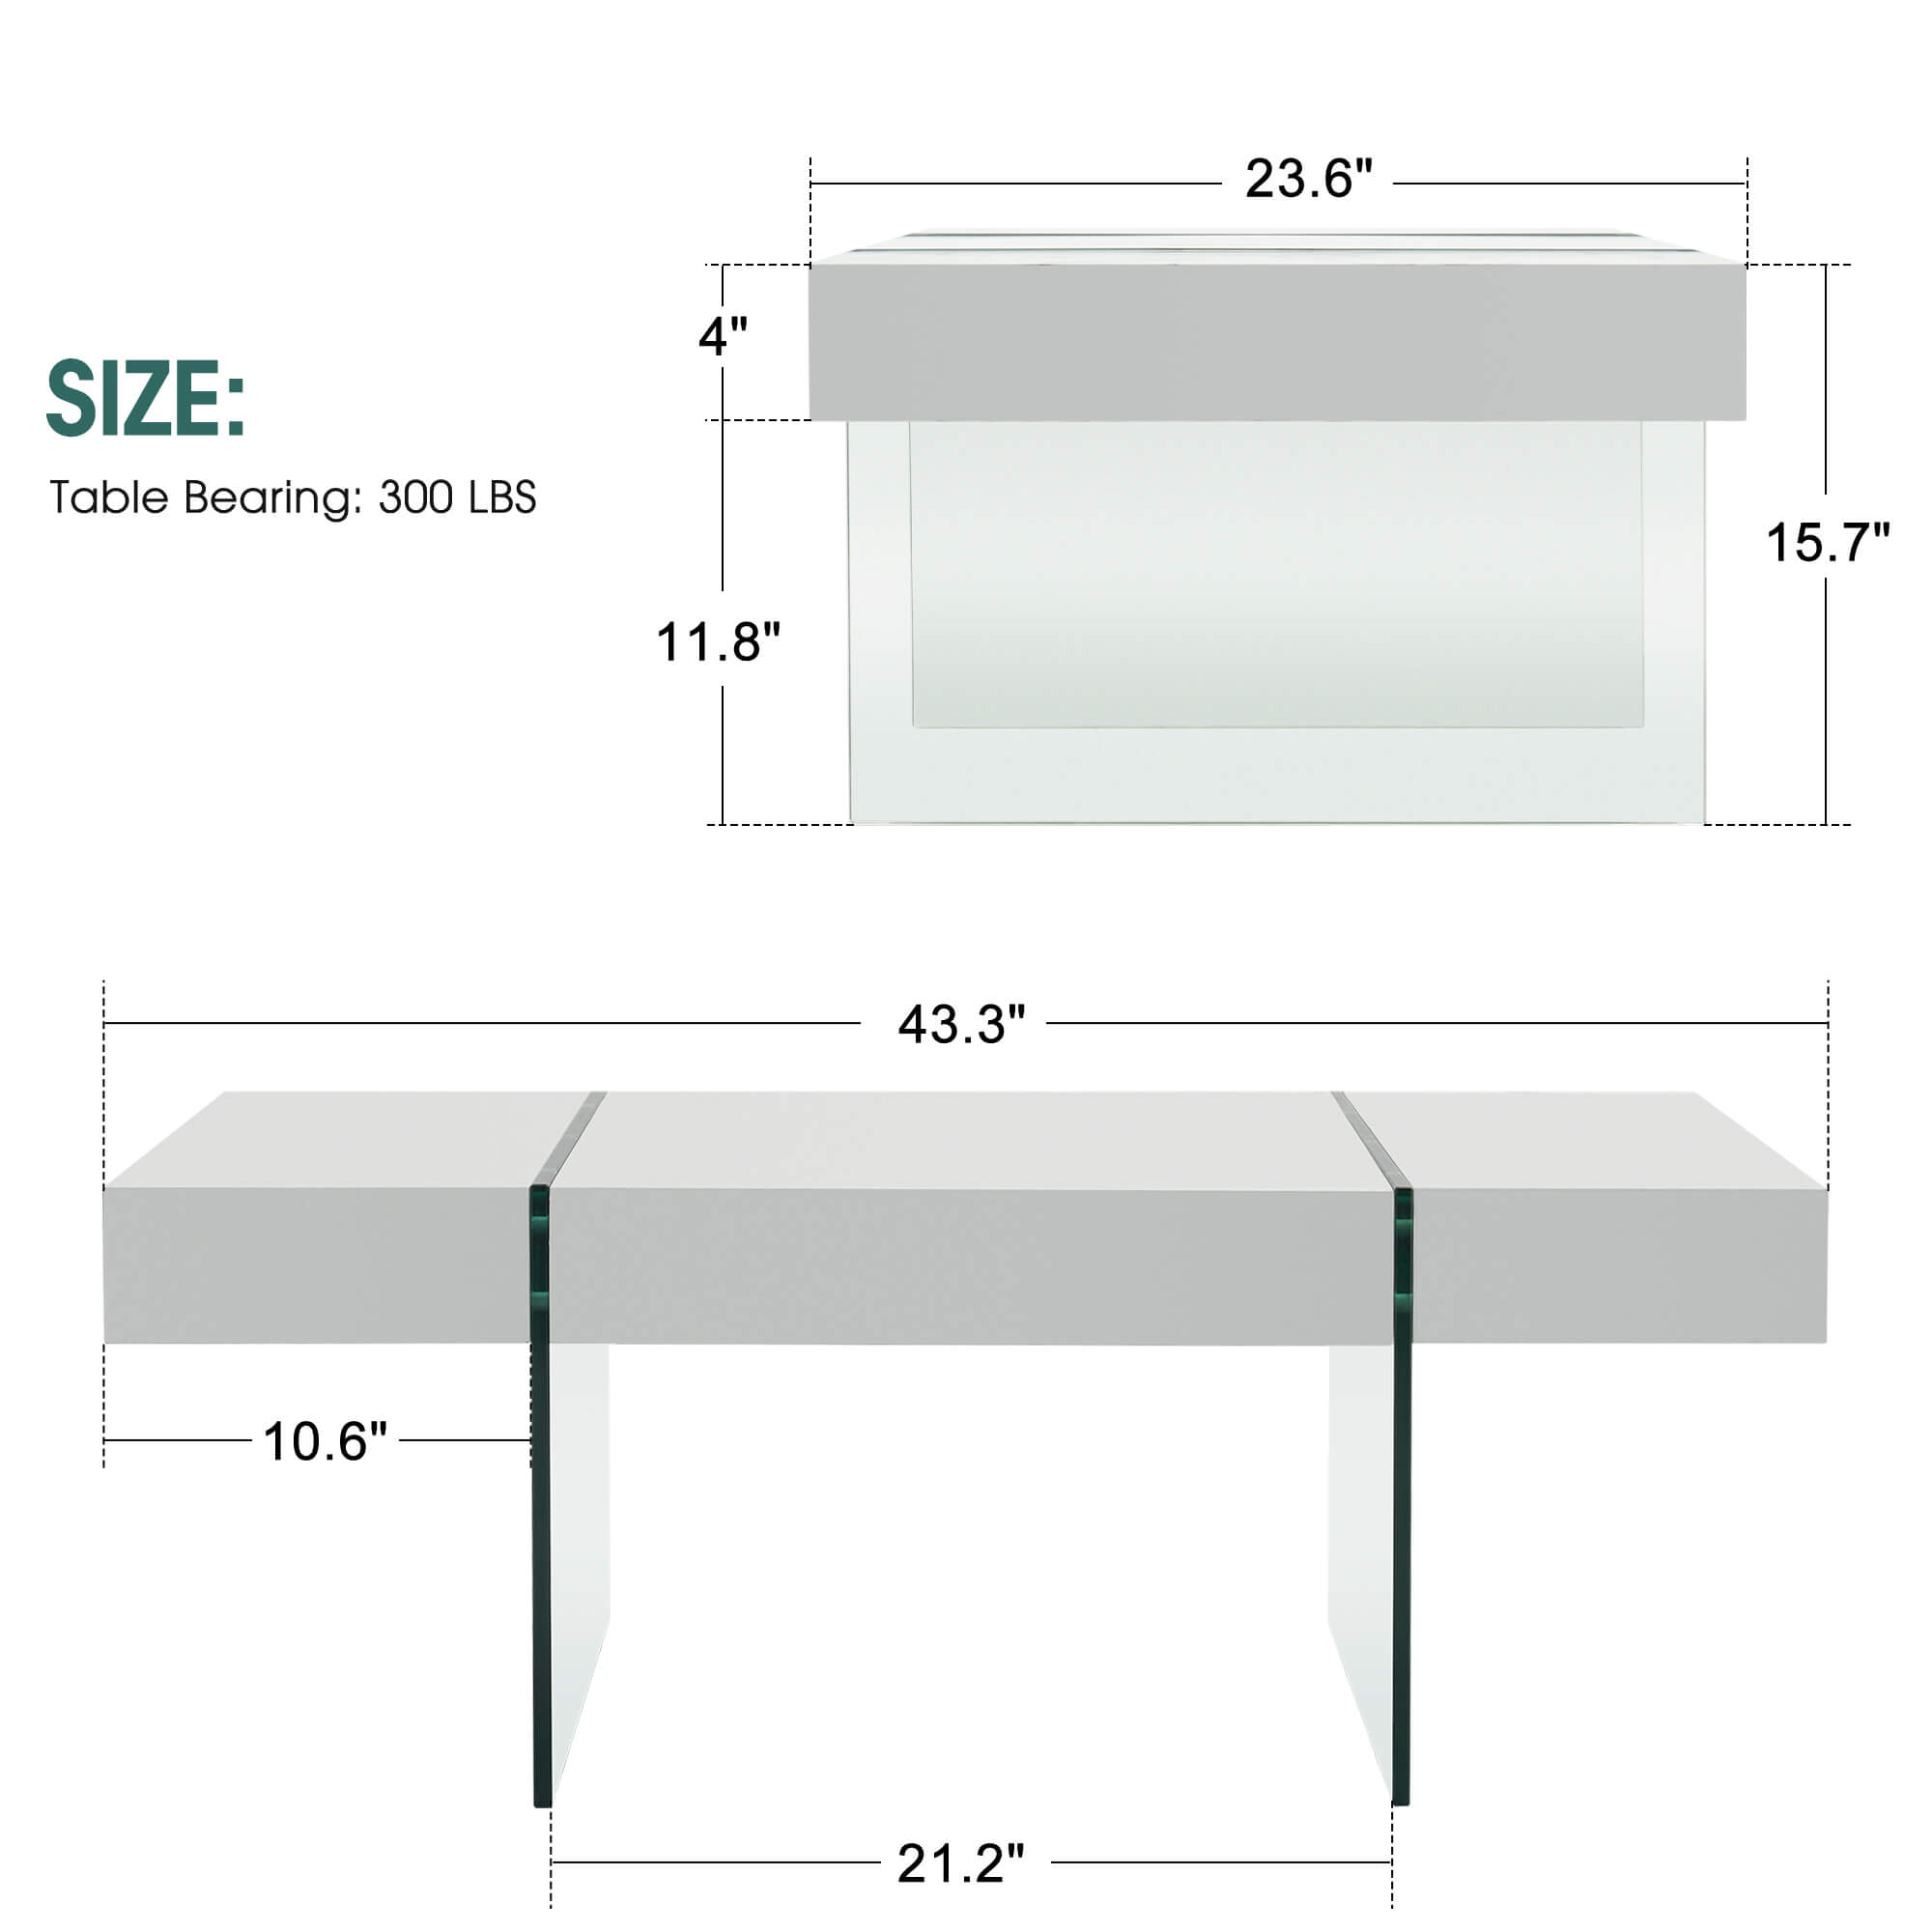 ivinta Rectangle Coffee Table, White High Gloss Coffee Table with Tempered Glass Legs